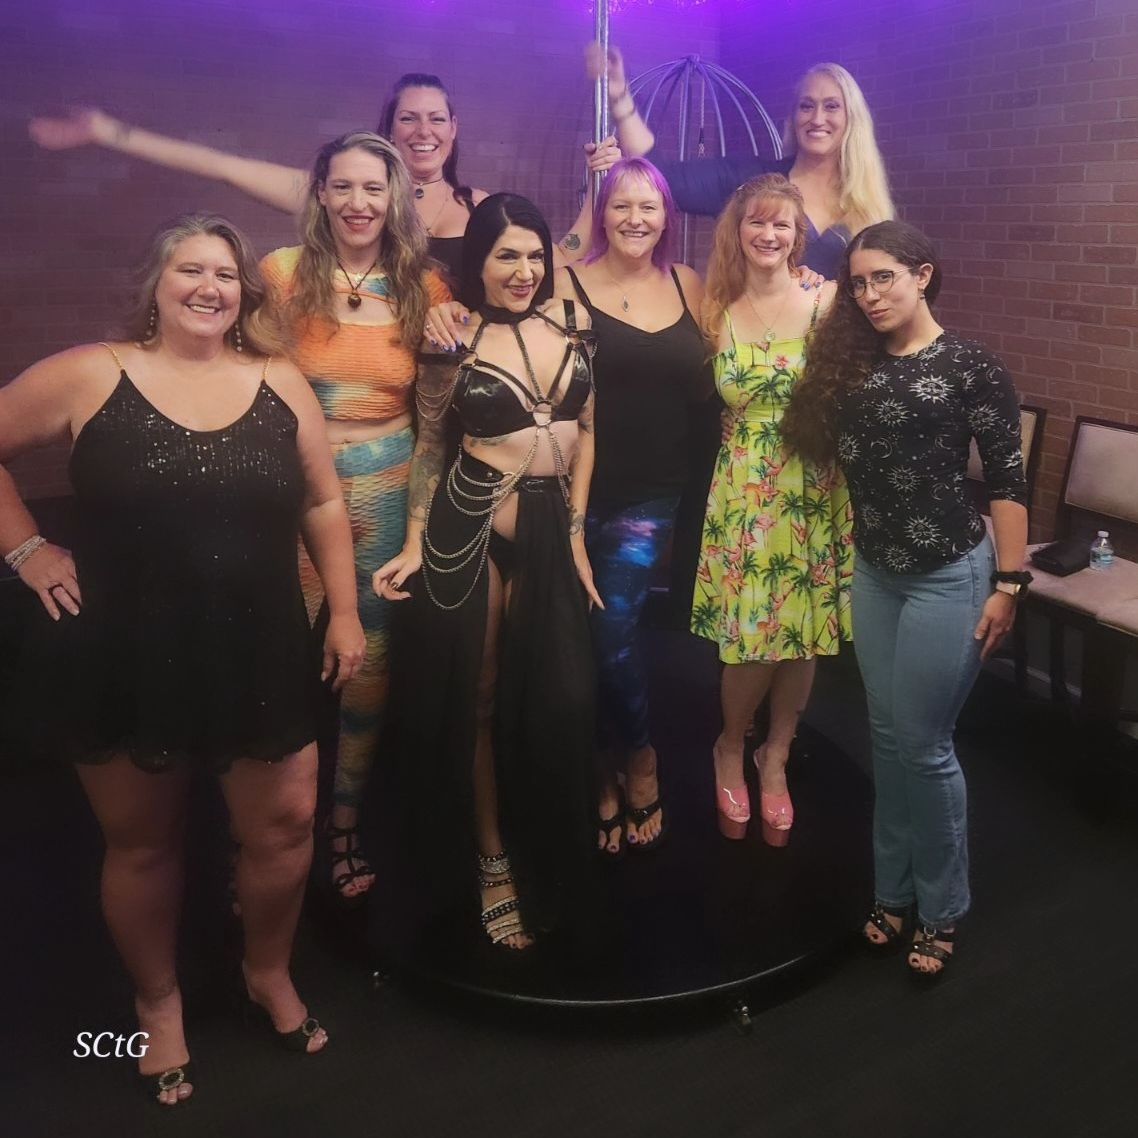 Jacksonville hosts by far my favorite Footnight @ckjstudiojax !! If you've never been, you're definitely missing out!! The next one will be September 12th. Mark your calendars!

 
From L to R: NitaKitten, Soleful8Journey, VanessaRain27
msjennifoxx, Ginger_piggies, Seechellesize18 
yesmsdraven (search for them on x)